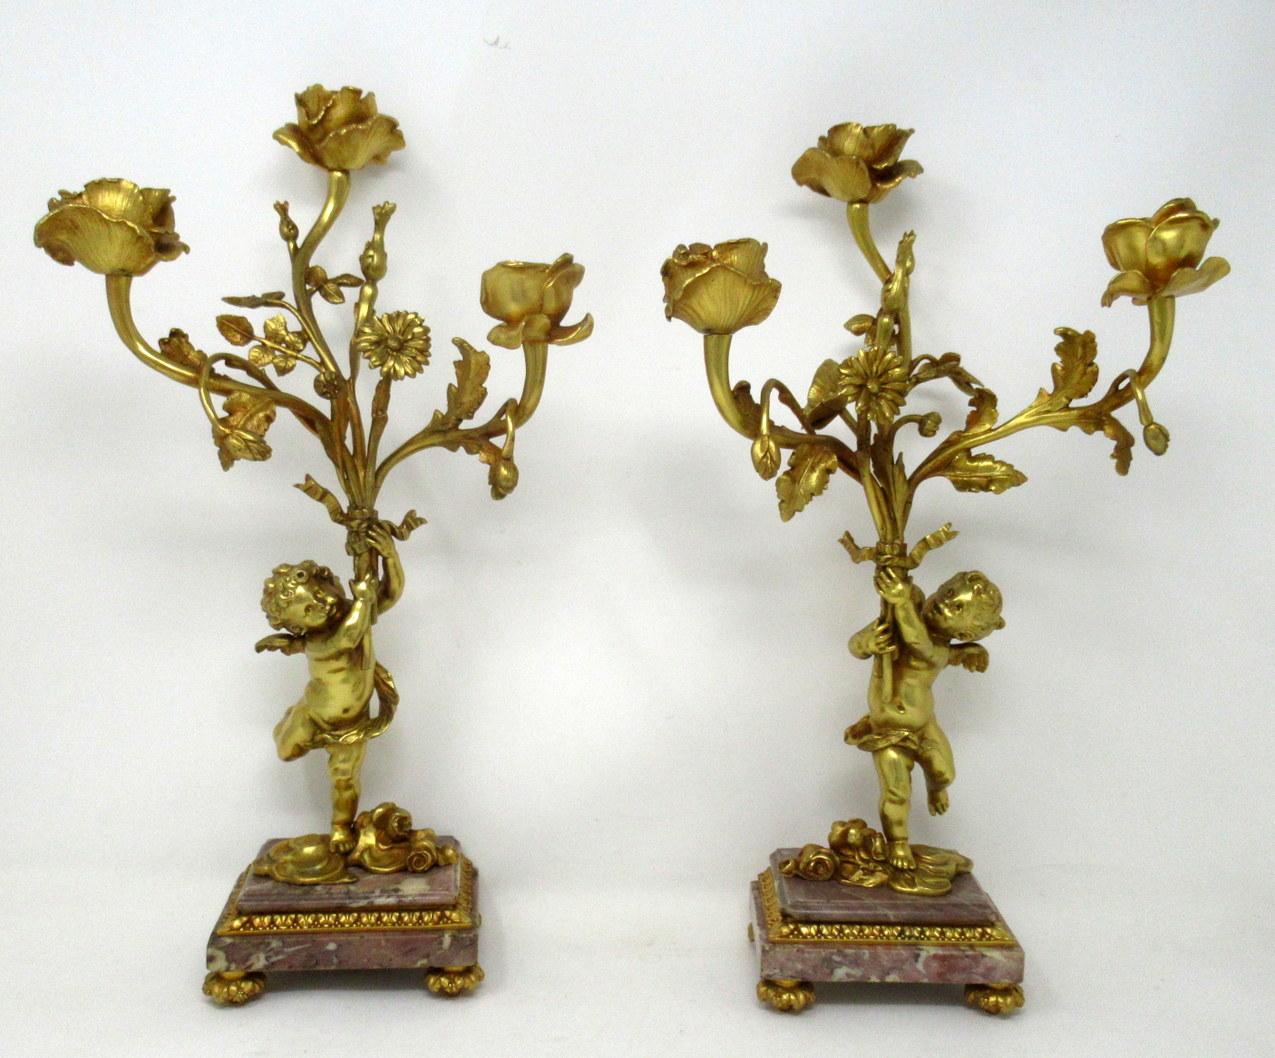 A fine pair of stylish and imposing French Ormolu and Breche Violete three light table or mantle candelabra of outstanding quality, mid-late 19th century. 

Each with a central standing ormolu solid bronze Cherub holding a loft a three-branch